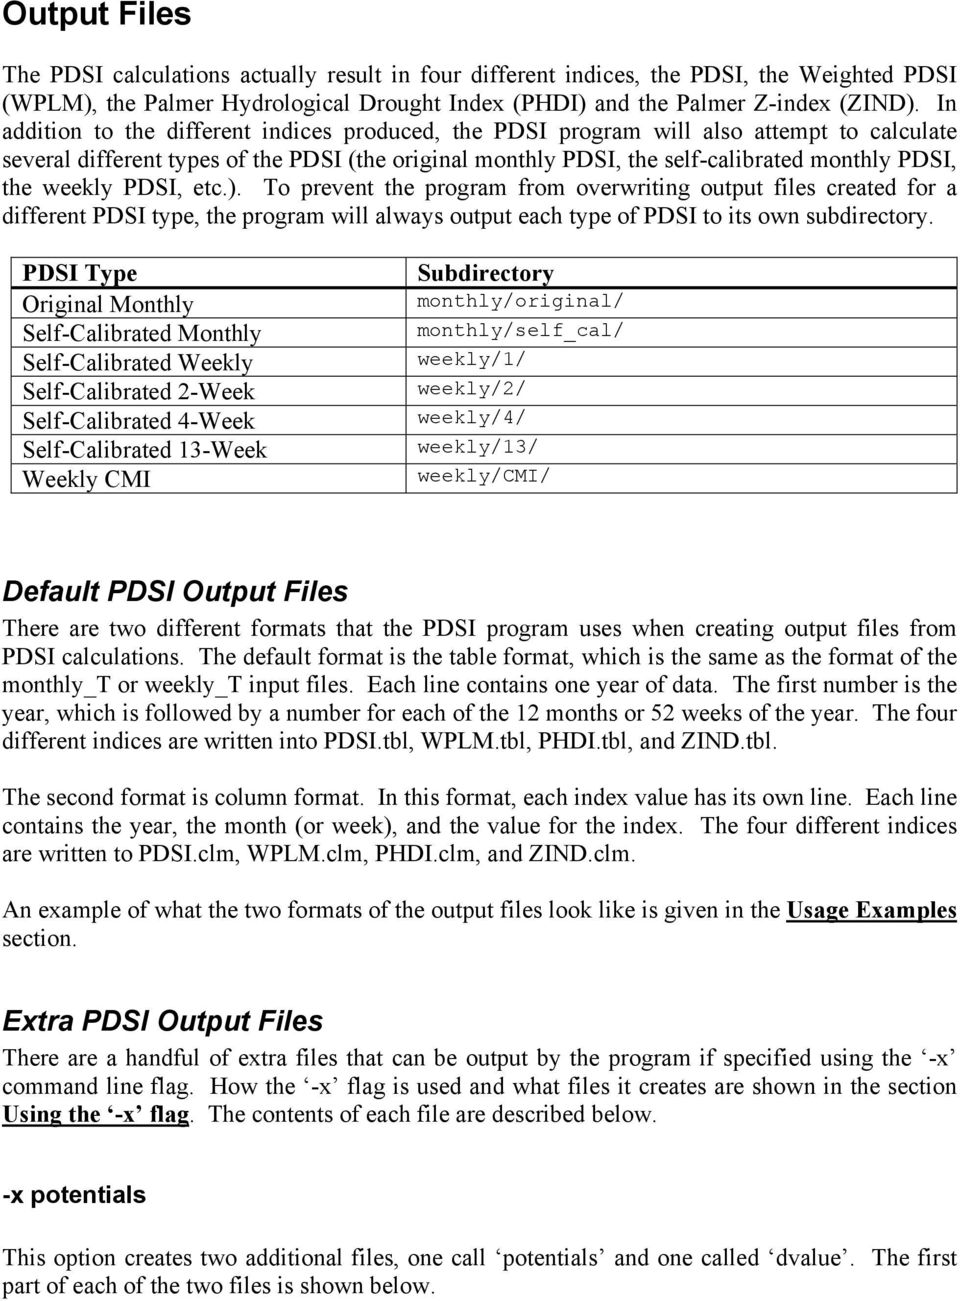 weekly PDSI, etc.). To prevent the program from overwriting output files created for a different PDSI type, the program will always output each type of PDSI to its own subdirectory.